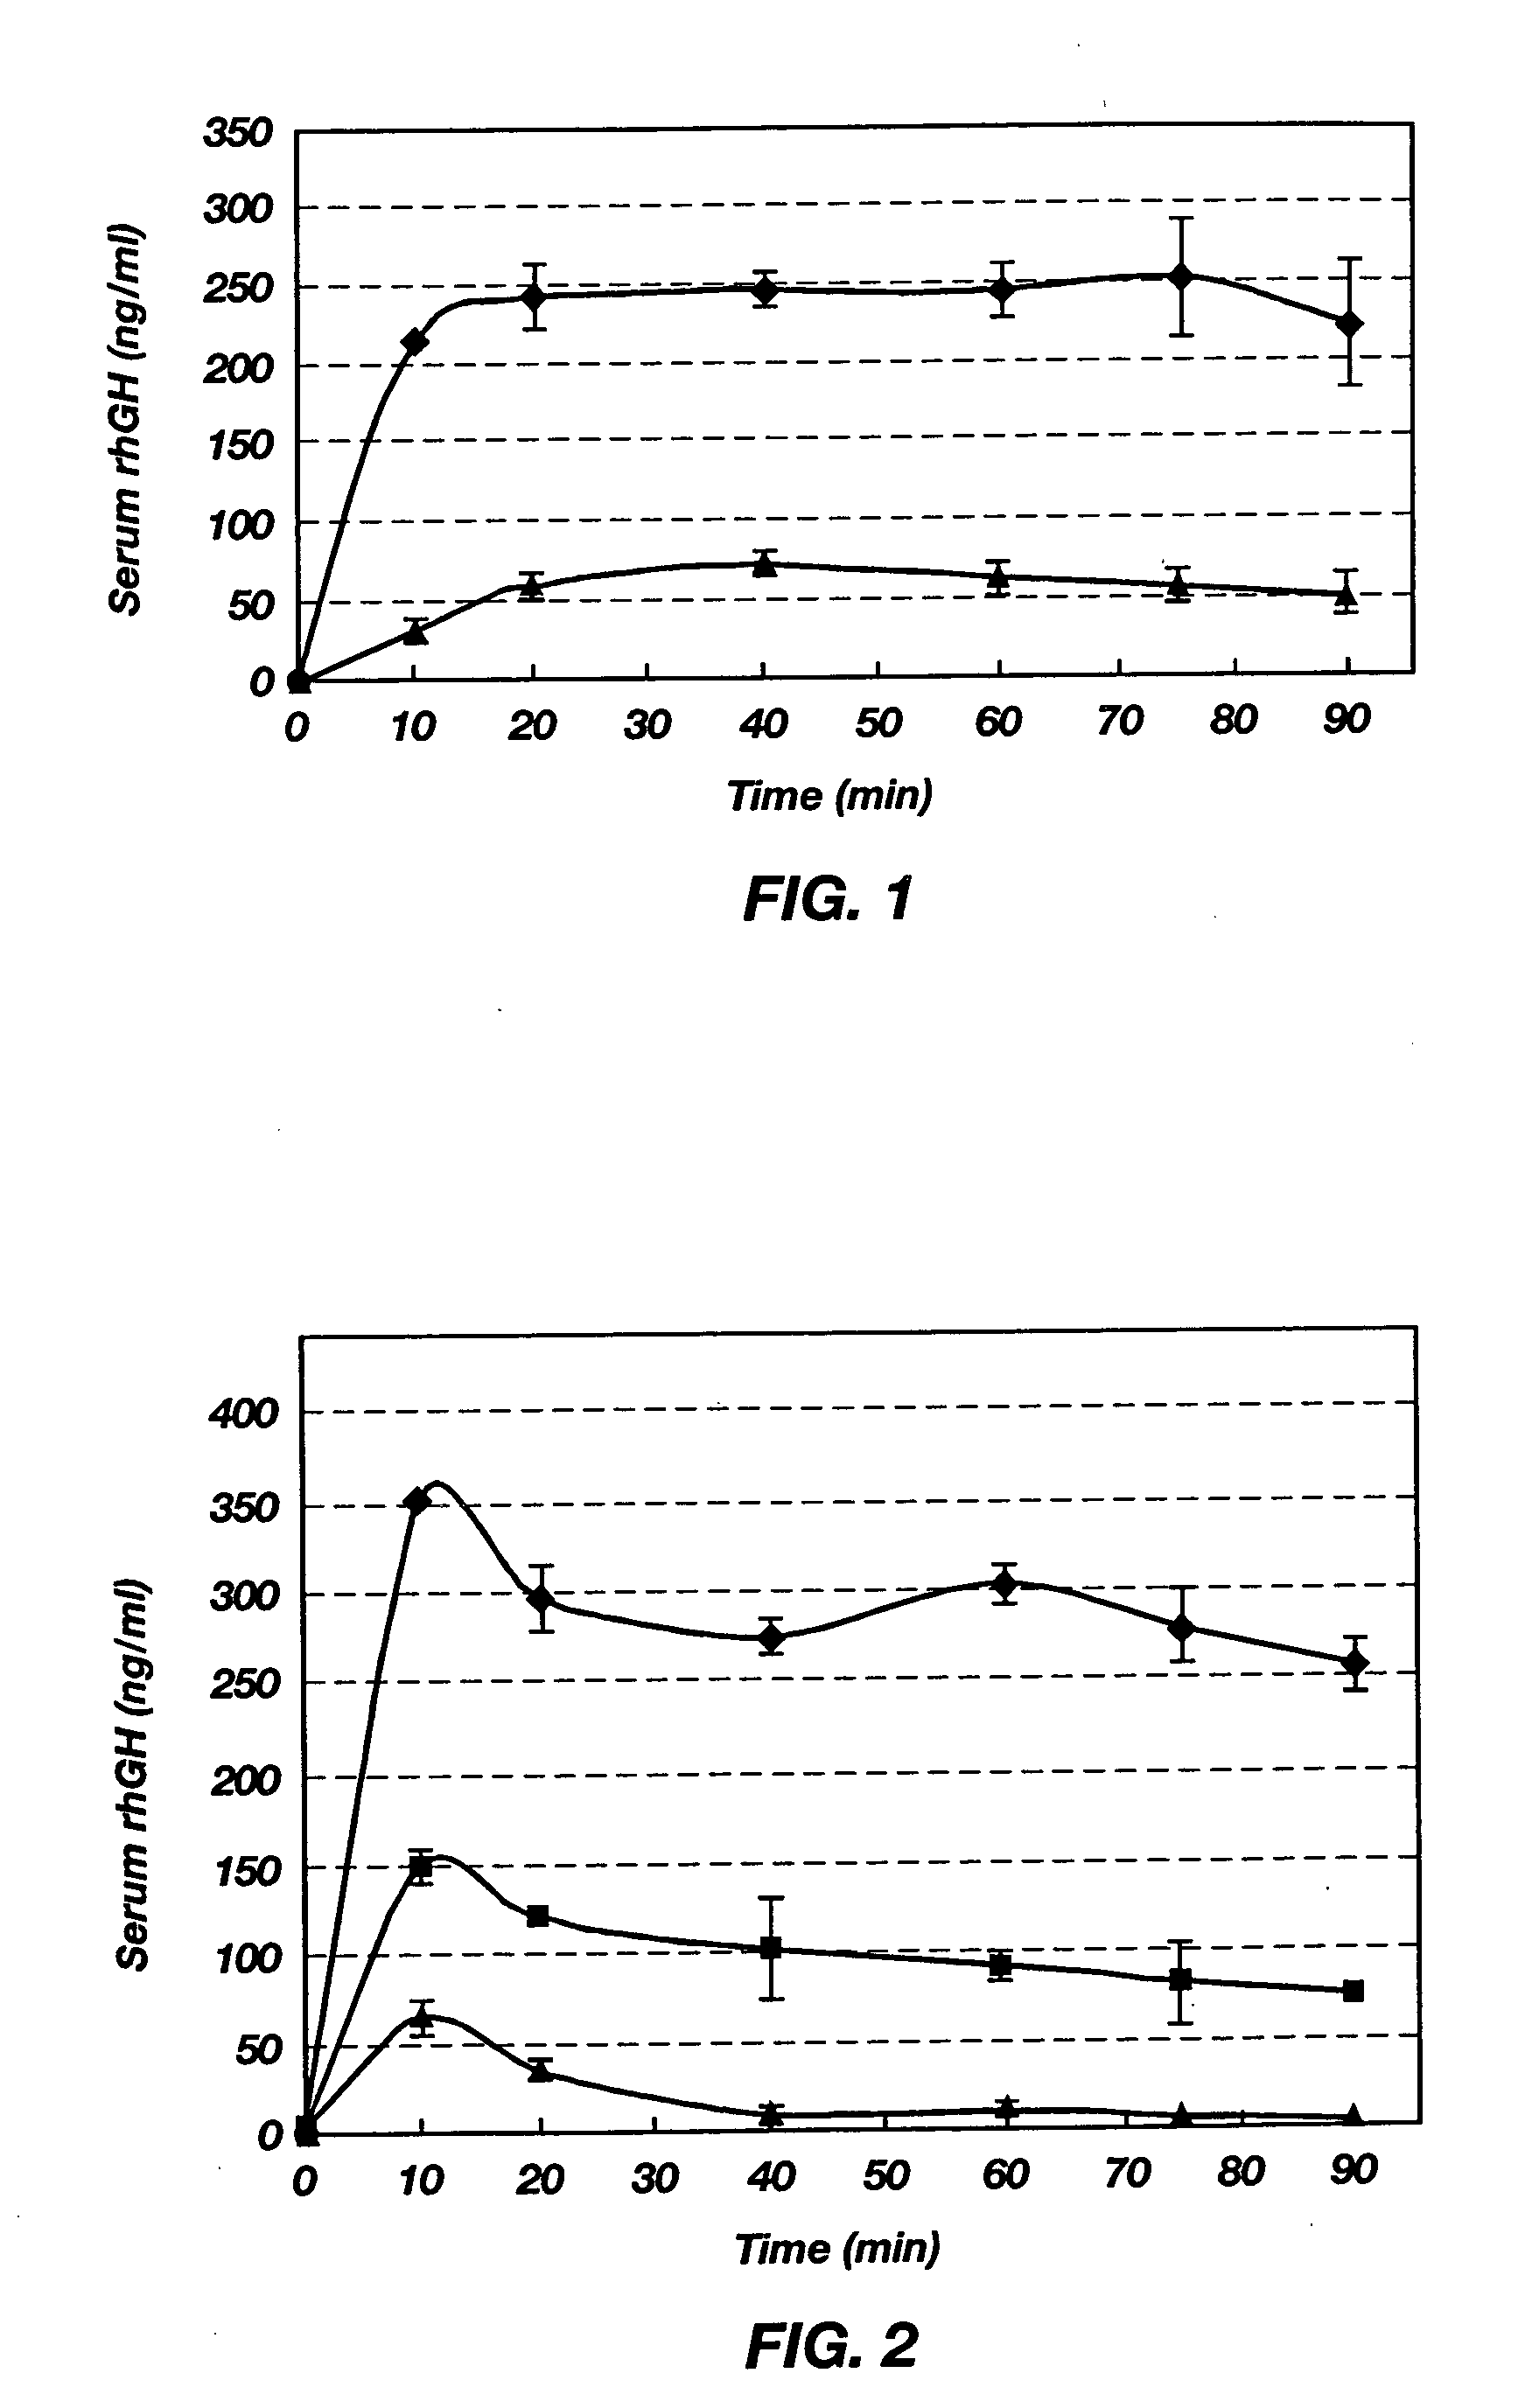 Oral formulation for delivery of poorly absorbed drugs